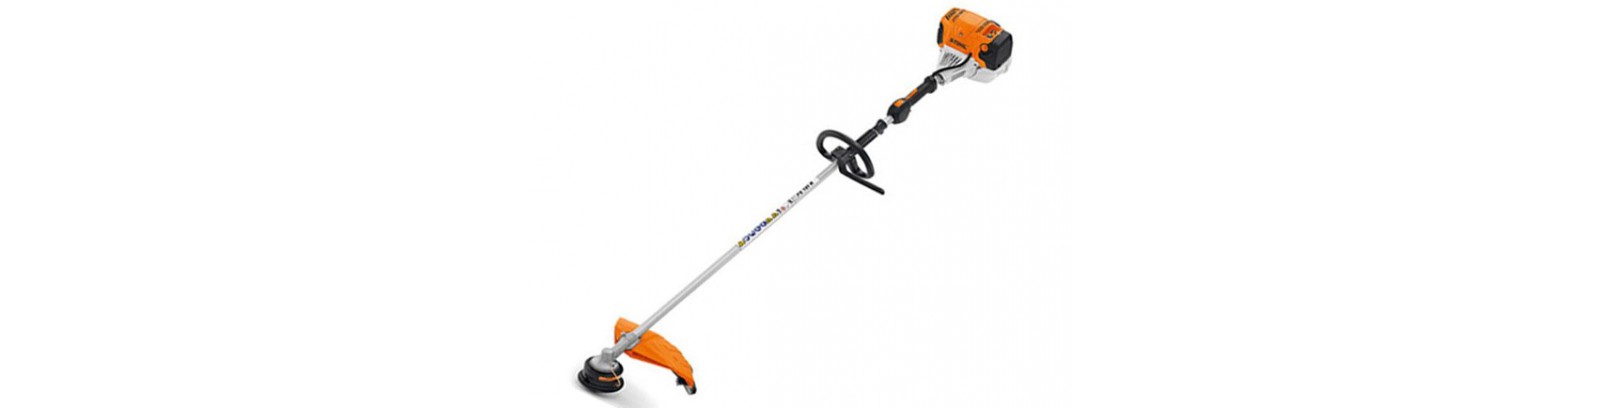 Petrol Grass Trimmers & Brushcutters